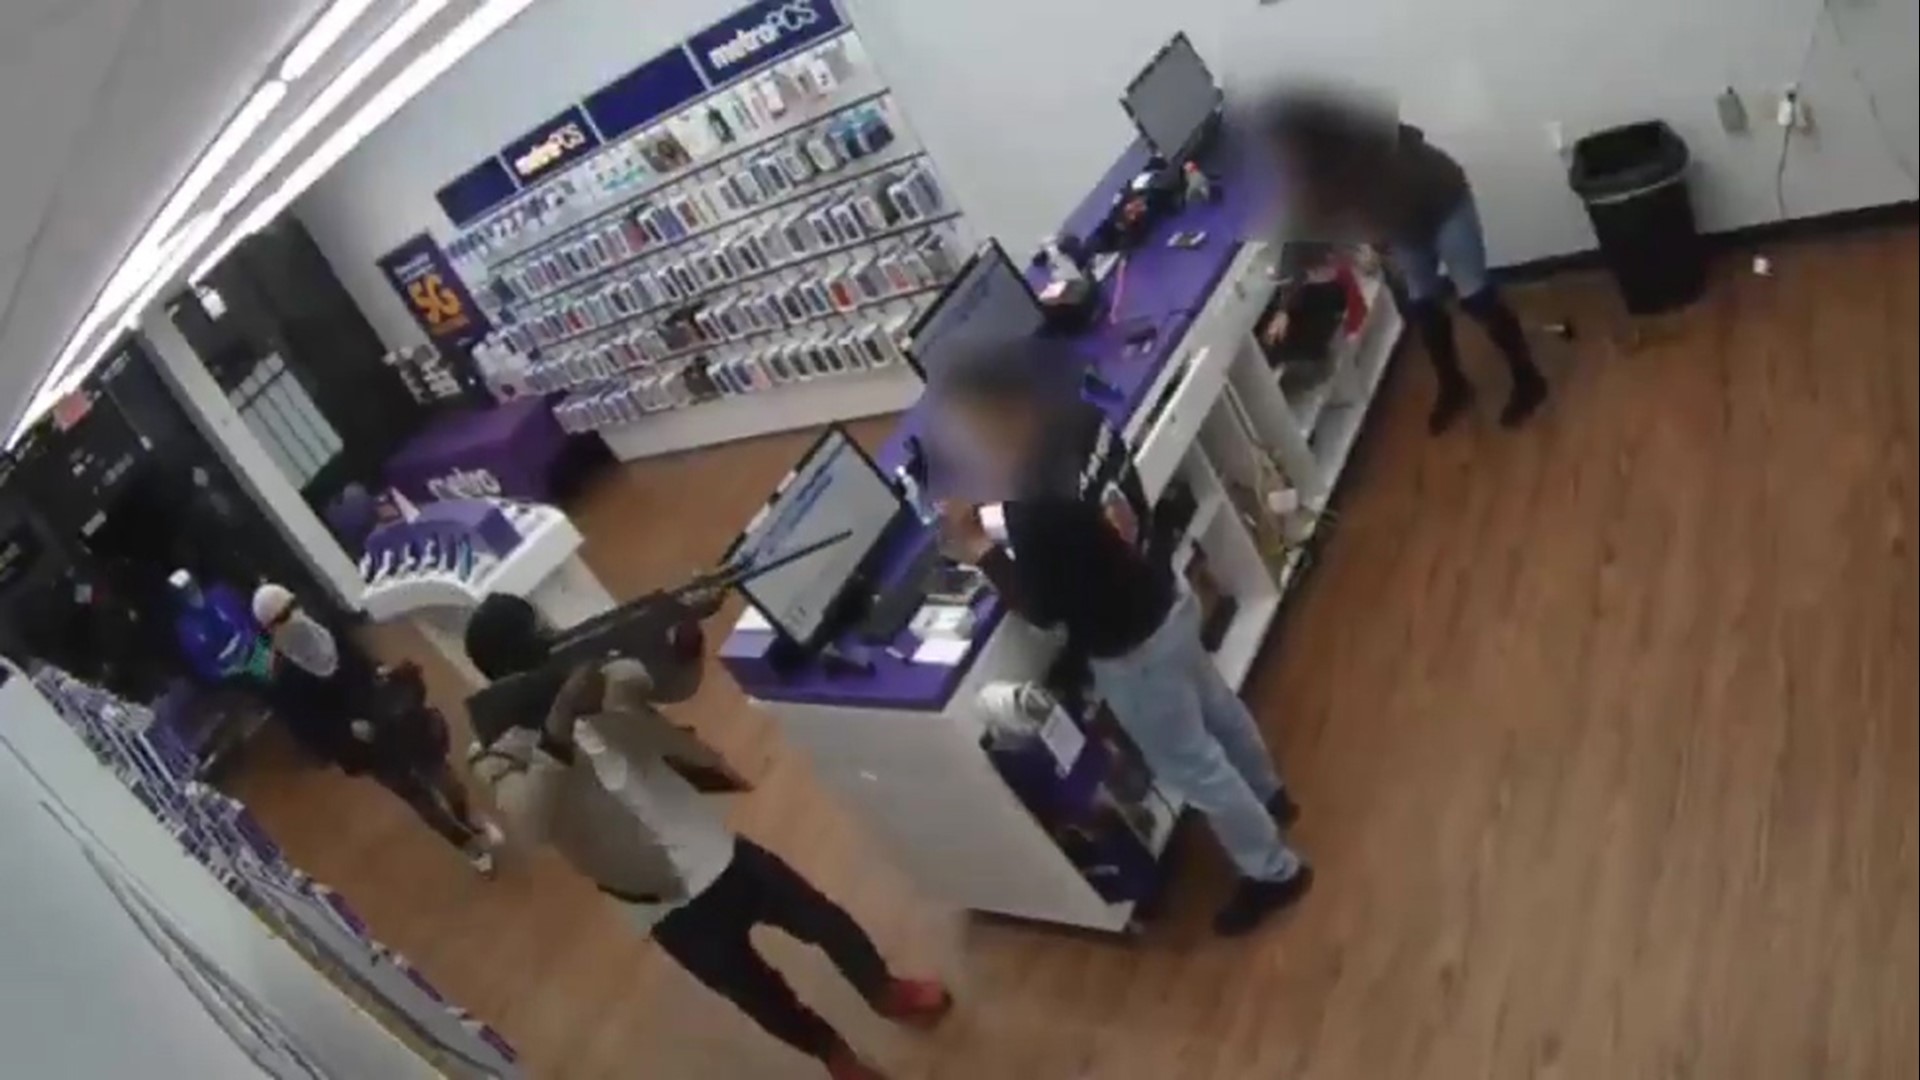 Police are asking for the public’s help in identifying the suspects responsible for a violent robbery of a cell phone store in north Houston last month.